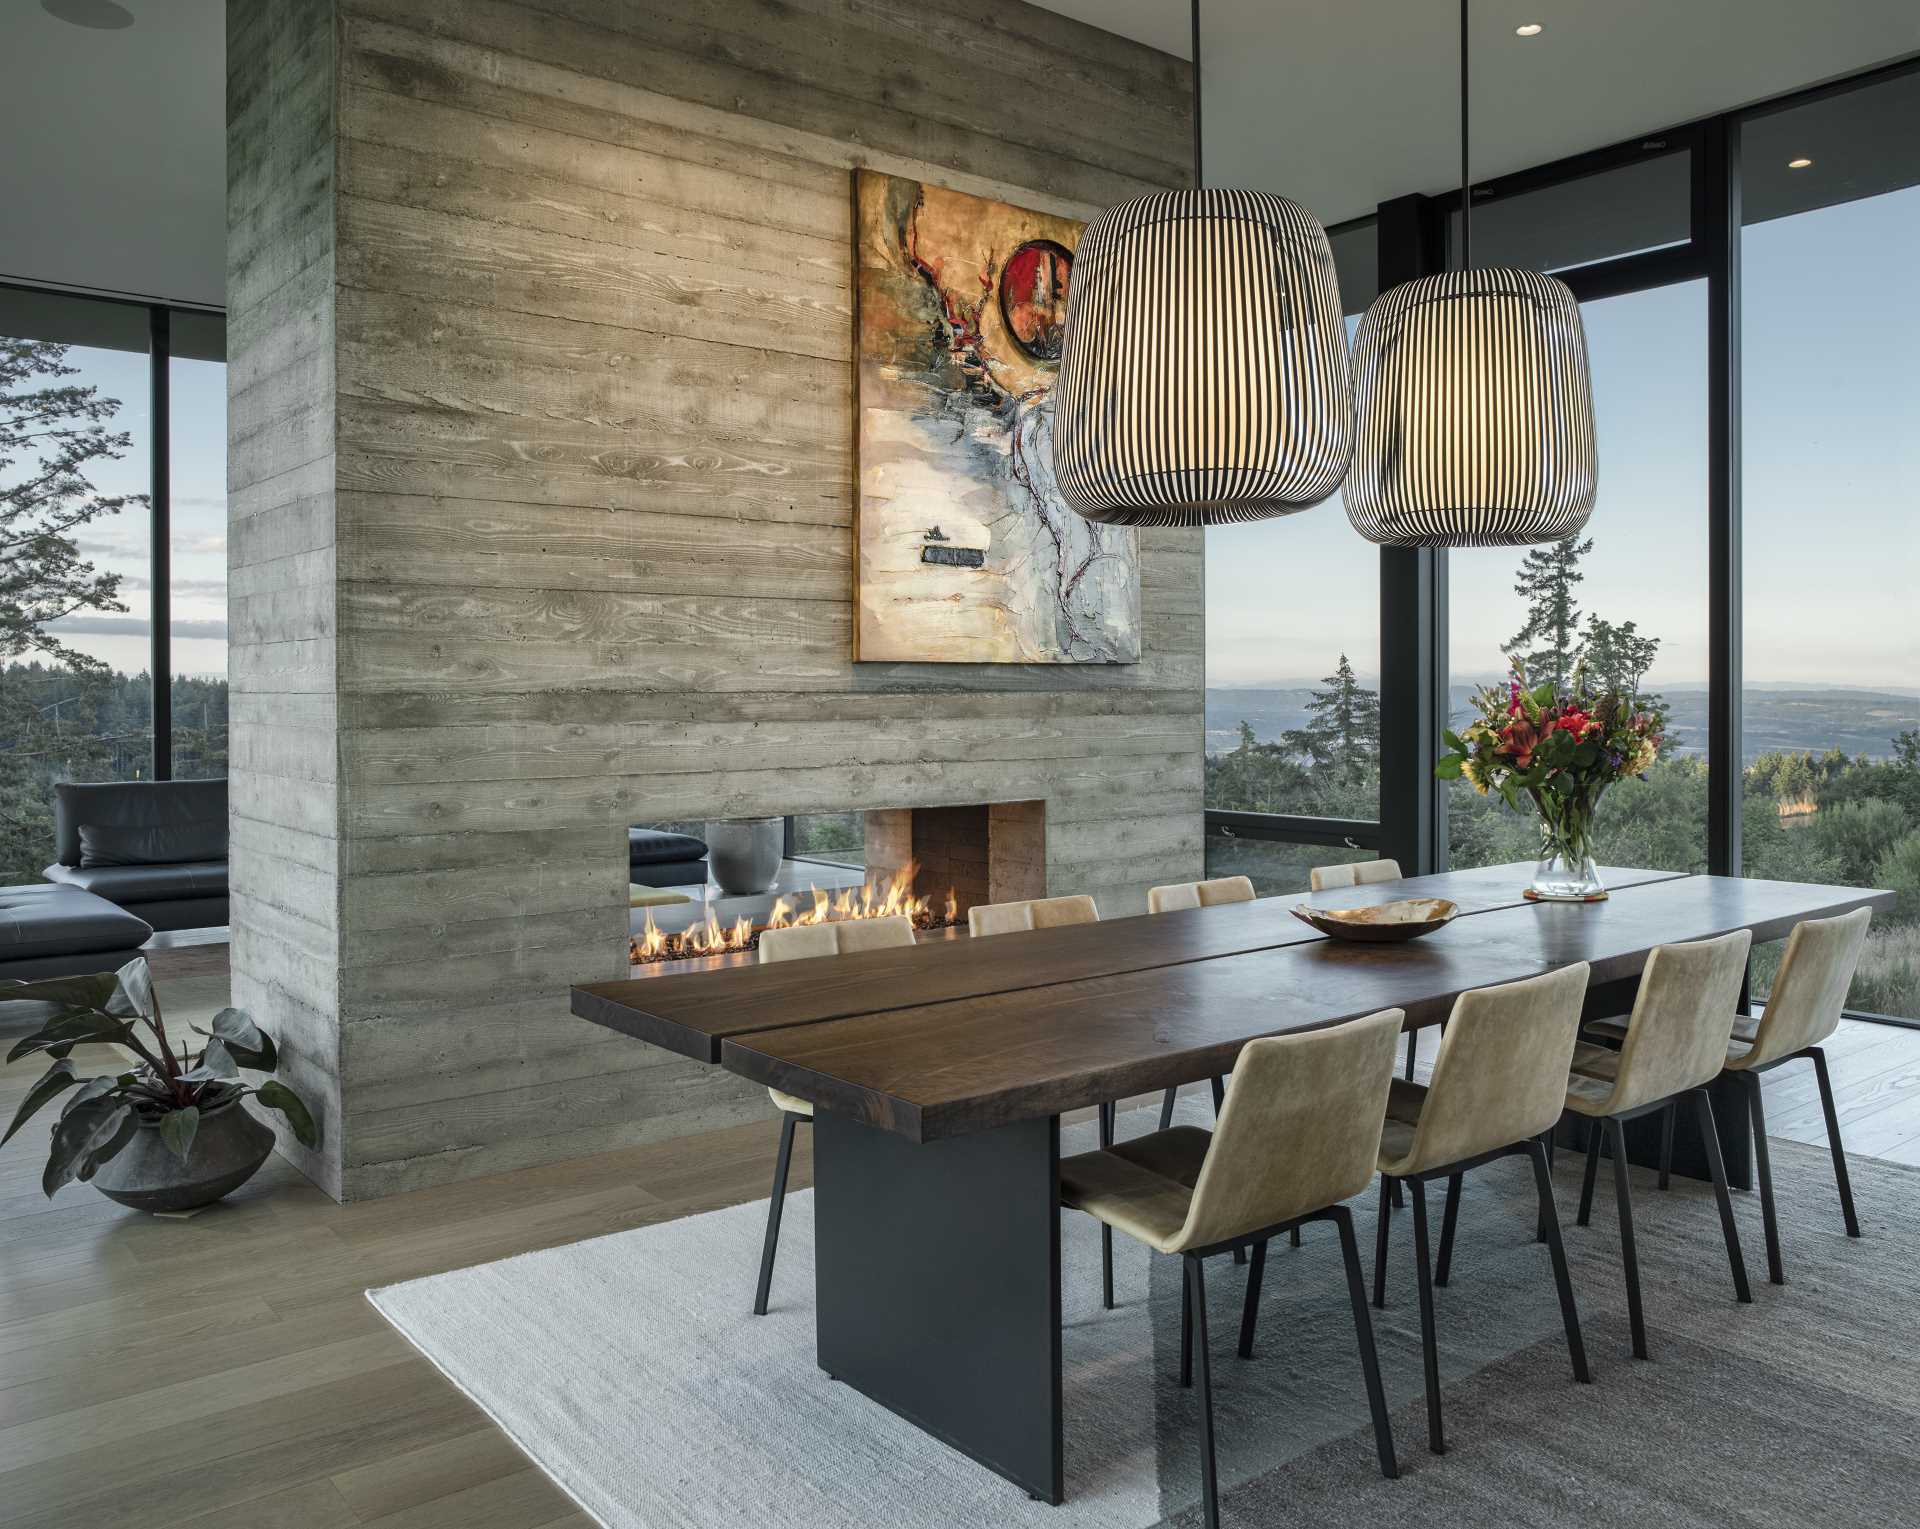 A board-formed, double-sided concrete fireplace can be enjoyed from living room and the dining room.